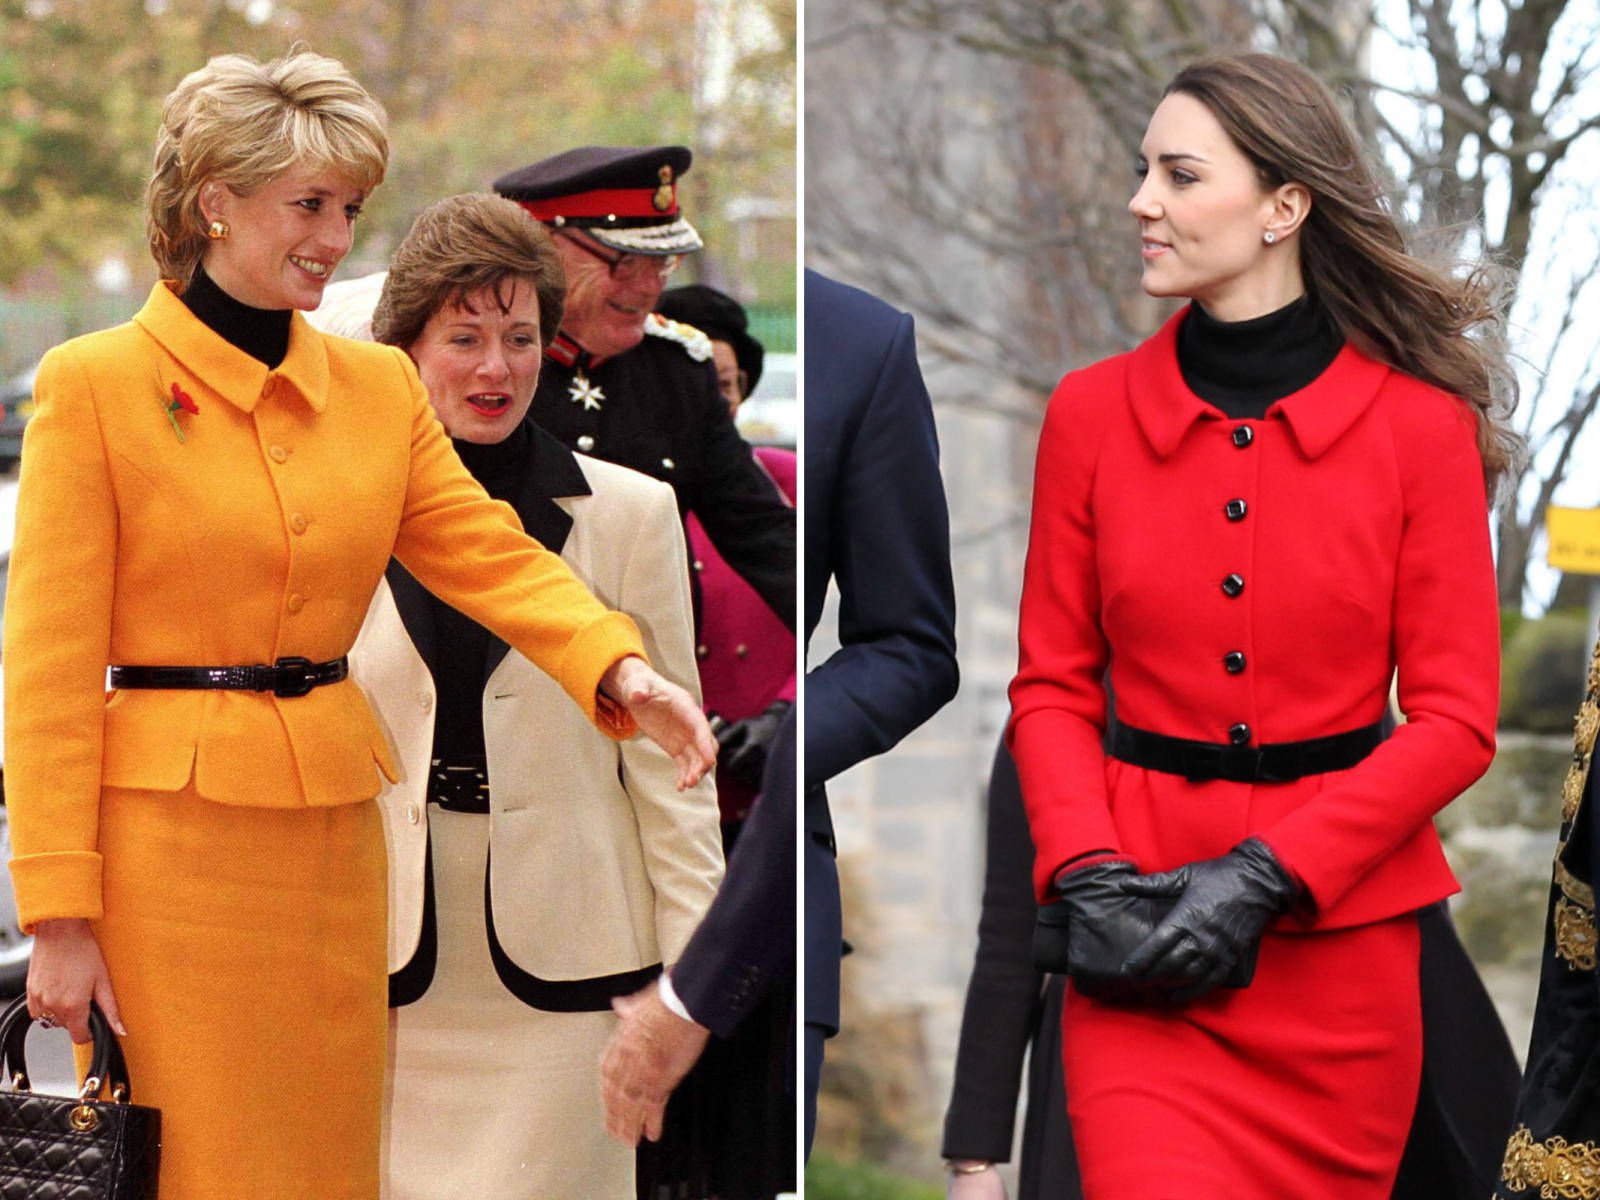 Princess Diana's Workwear Staple Loved by Kate Middleton: The Skirt Suit